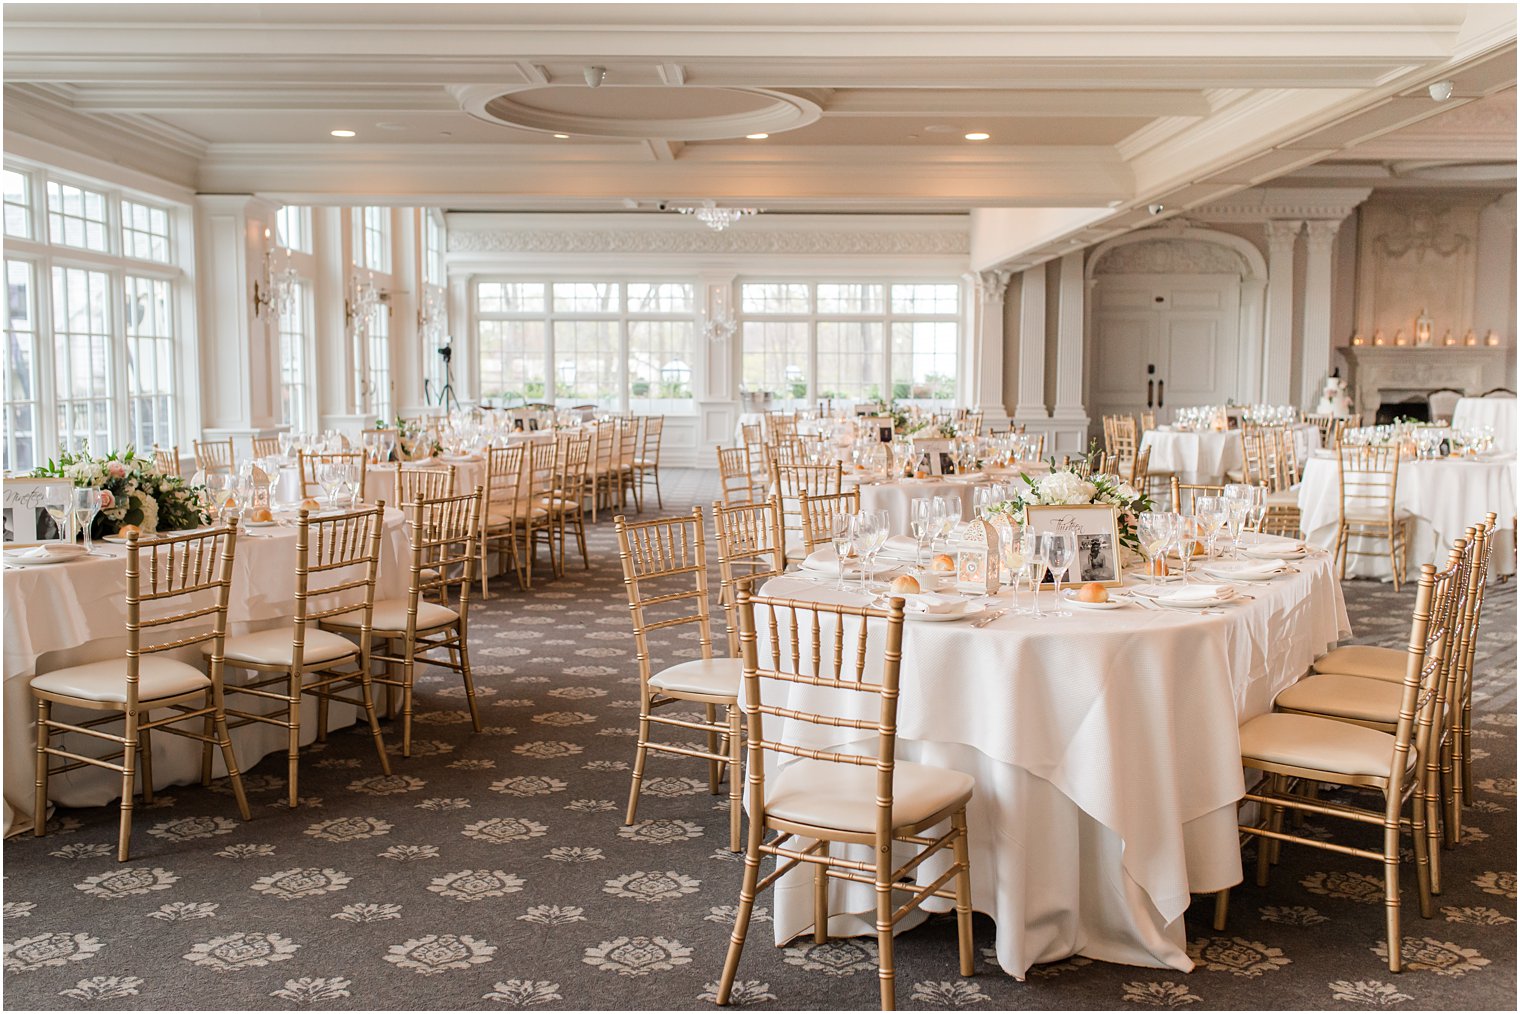 Spring Park Savoy Estate wedding reception with gold chivari chairs and ivory tablecloths 